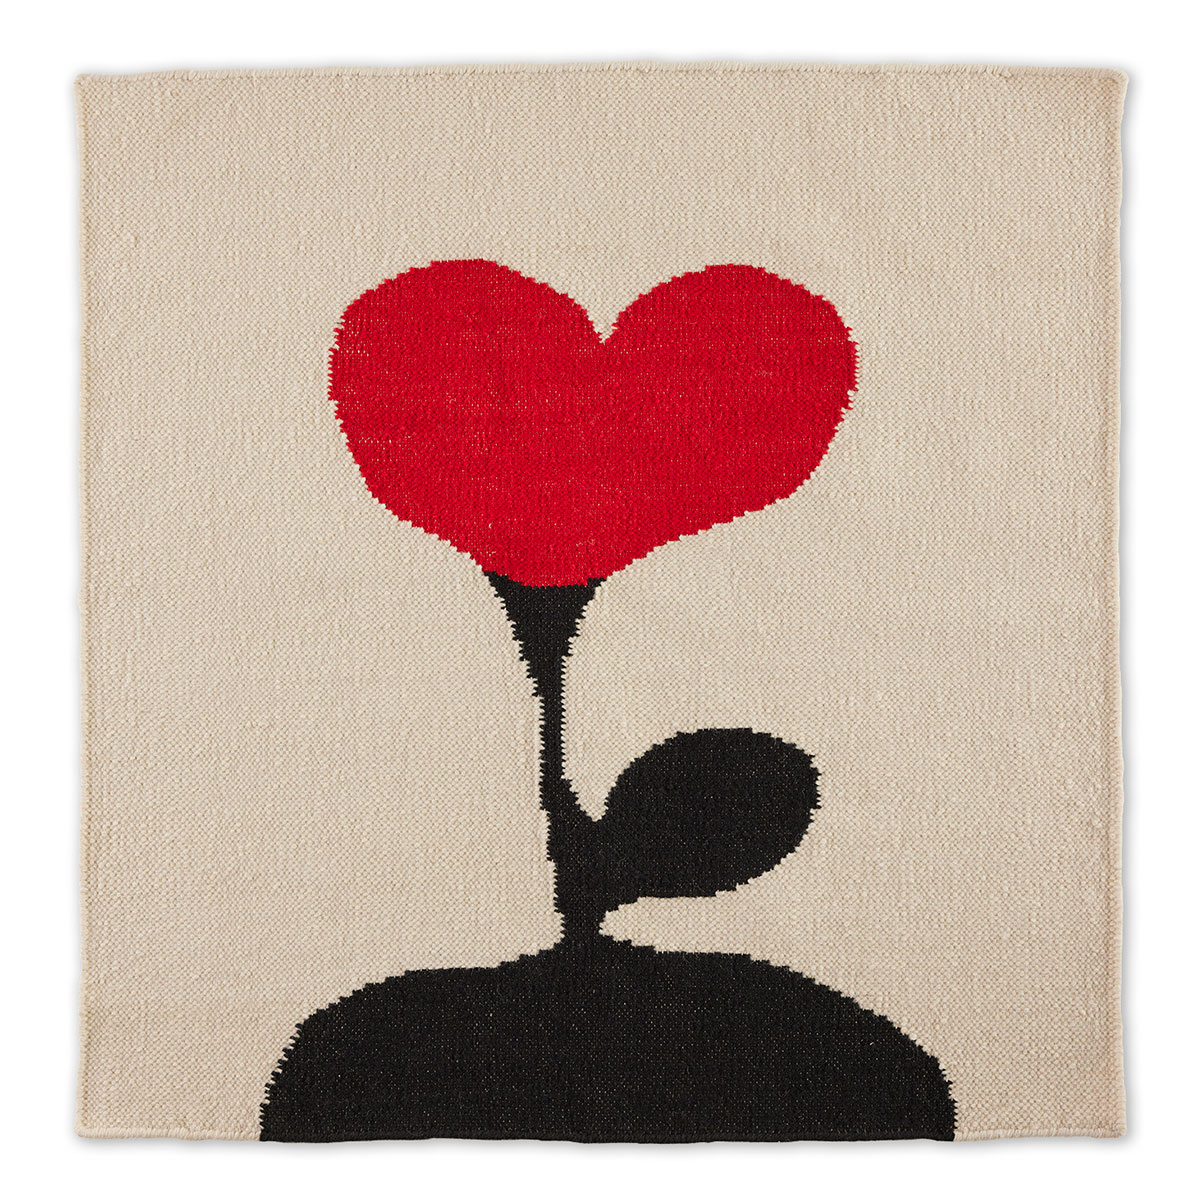 An abstract square red heart, and beige background rug named Love Blossom Crush.